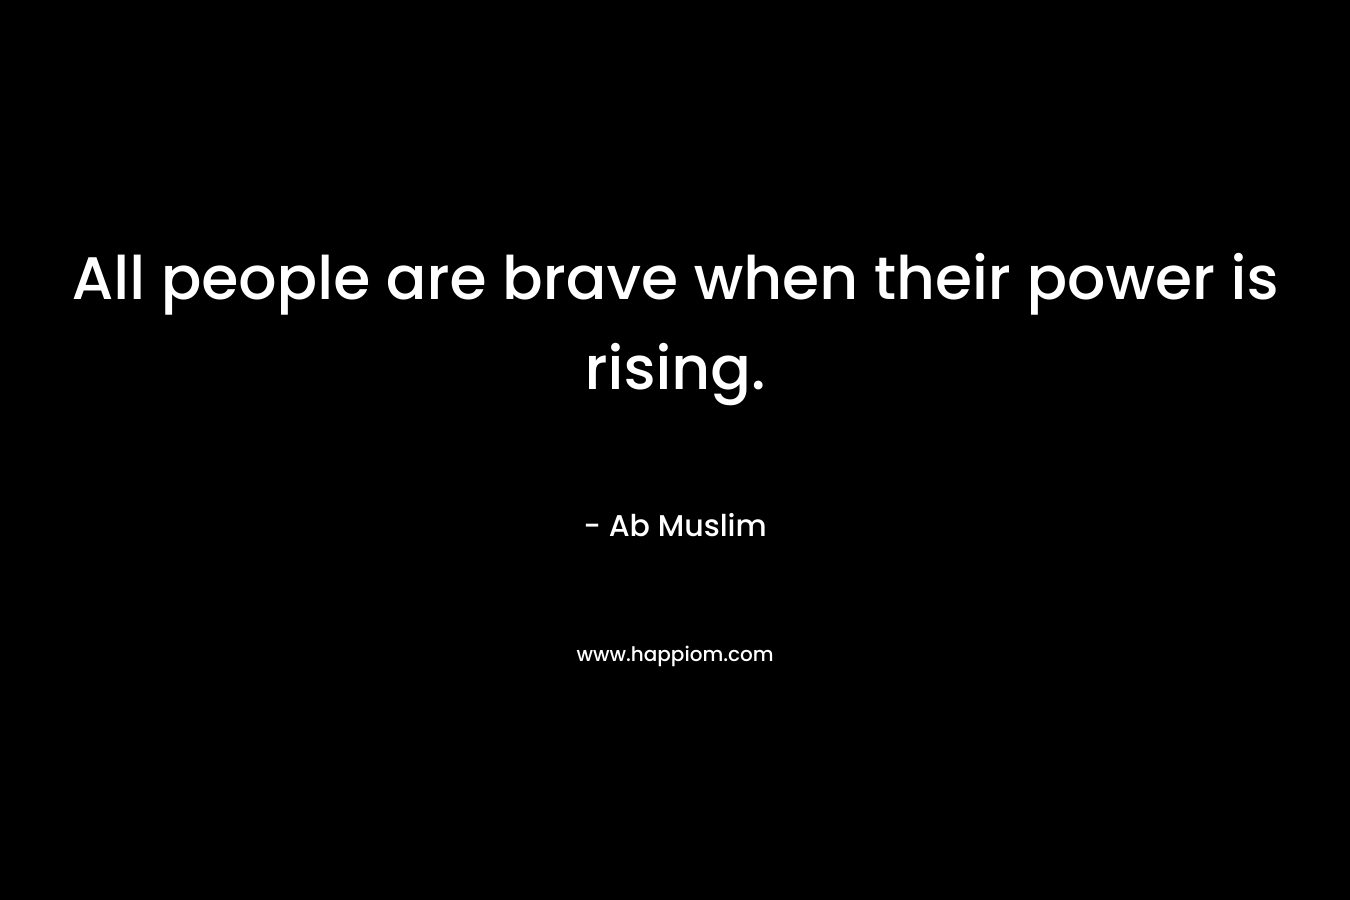 All people are brave when their power is rising. – Ab Muslim